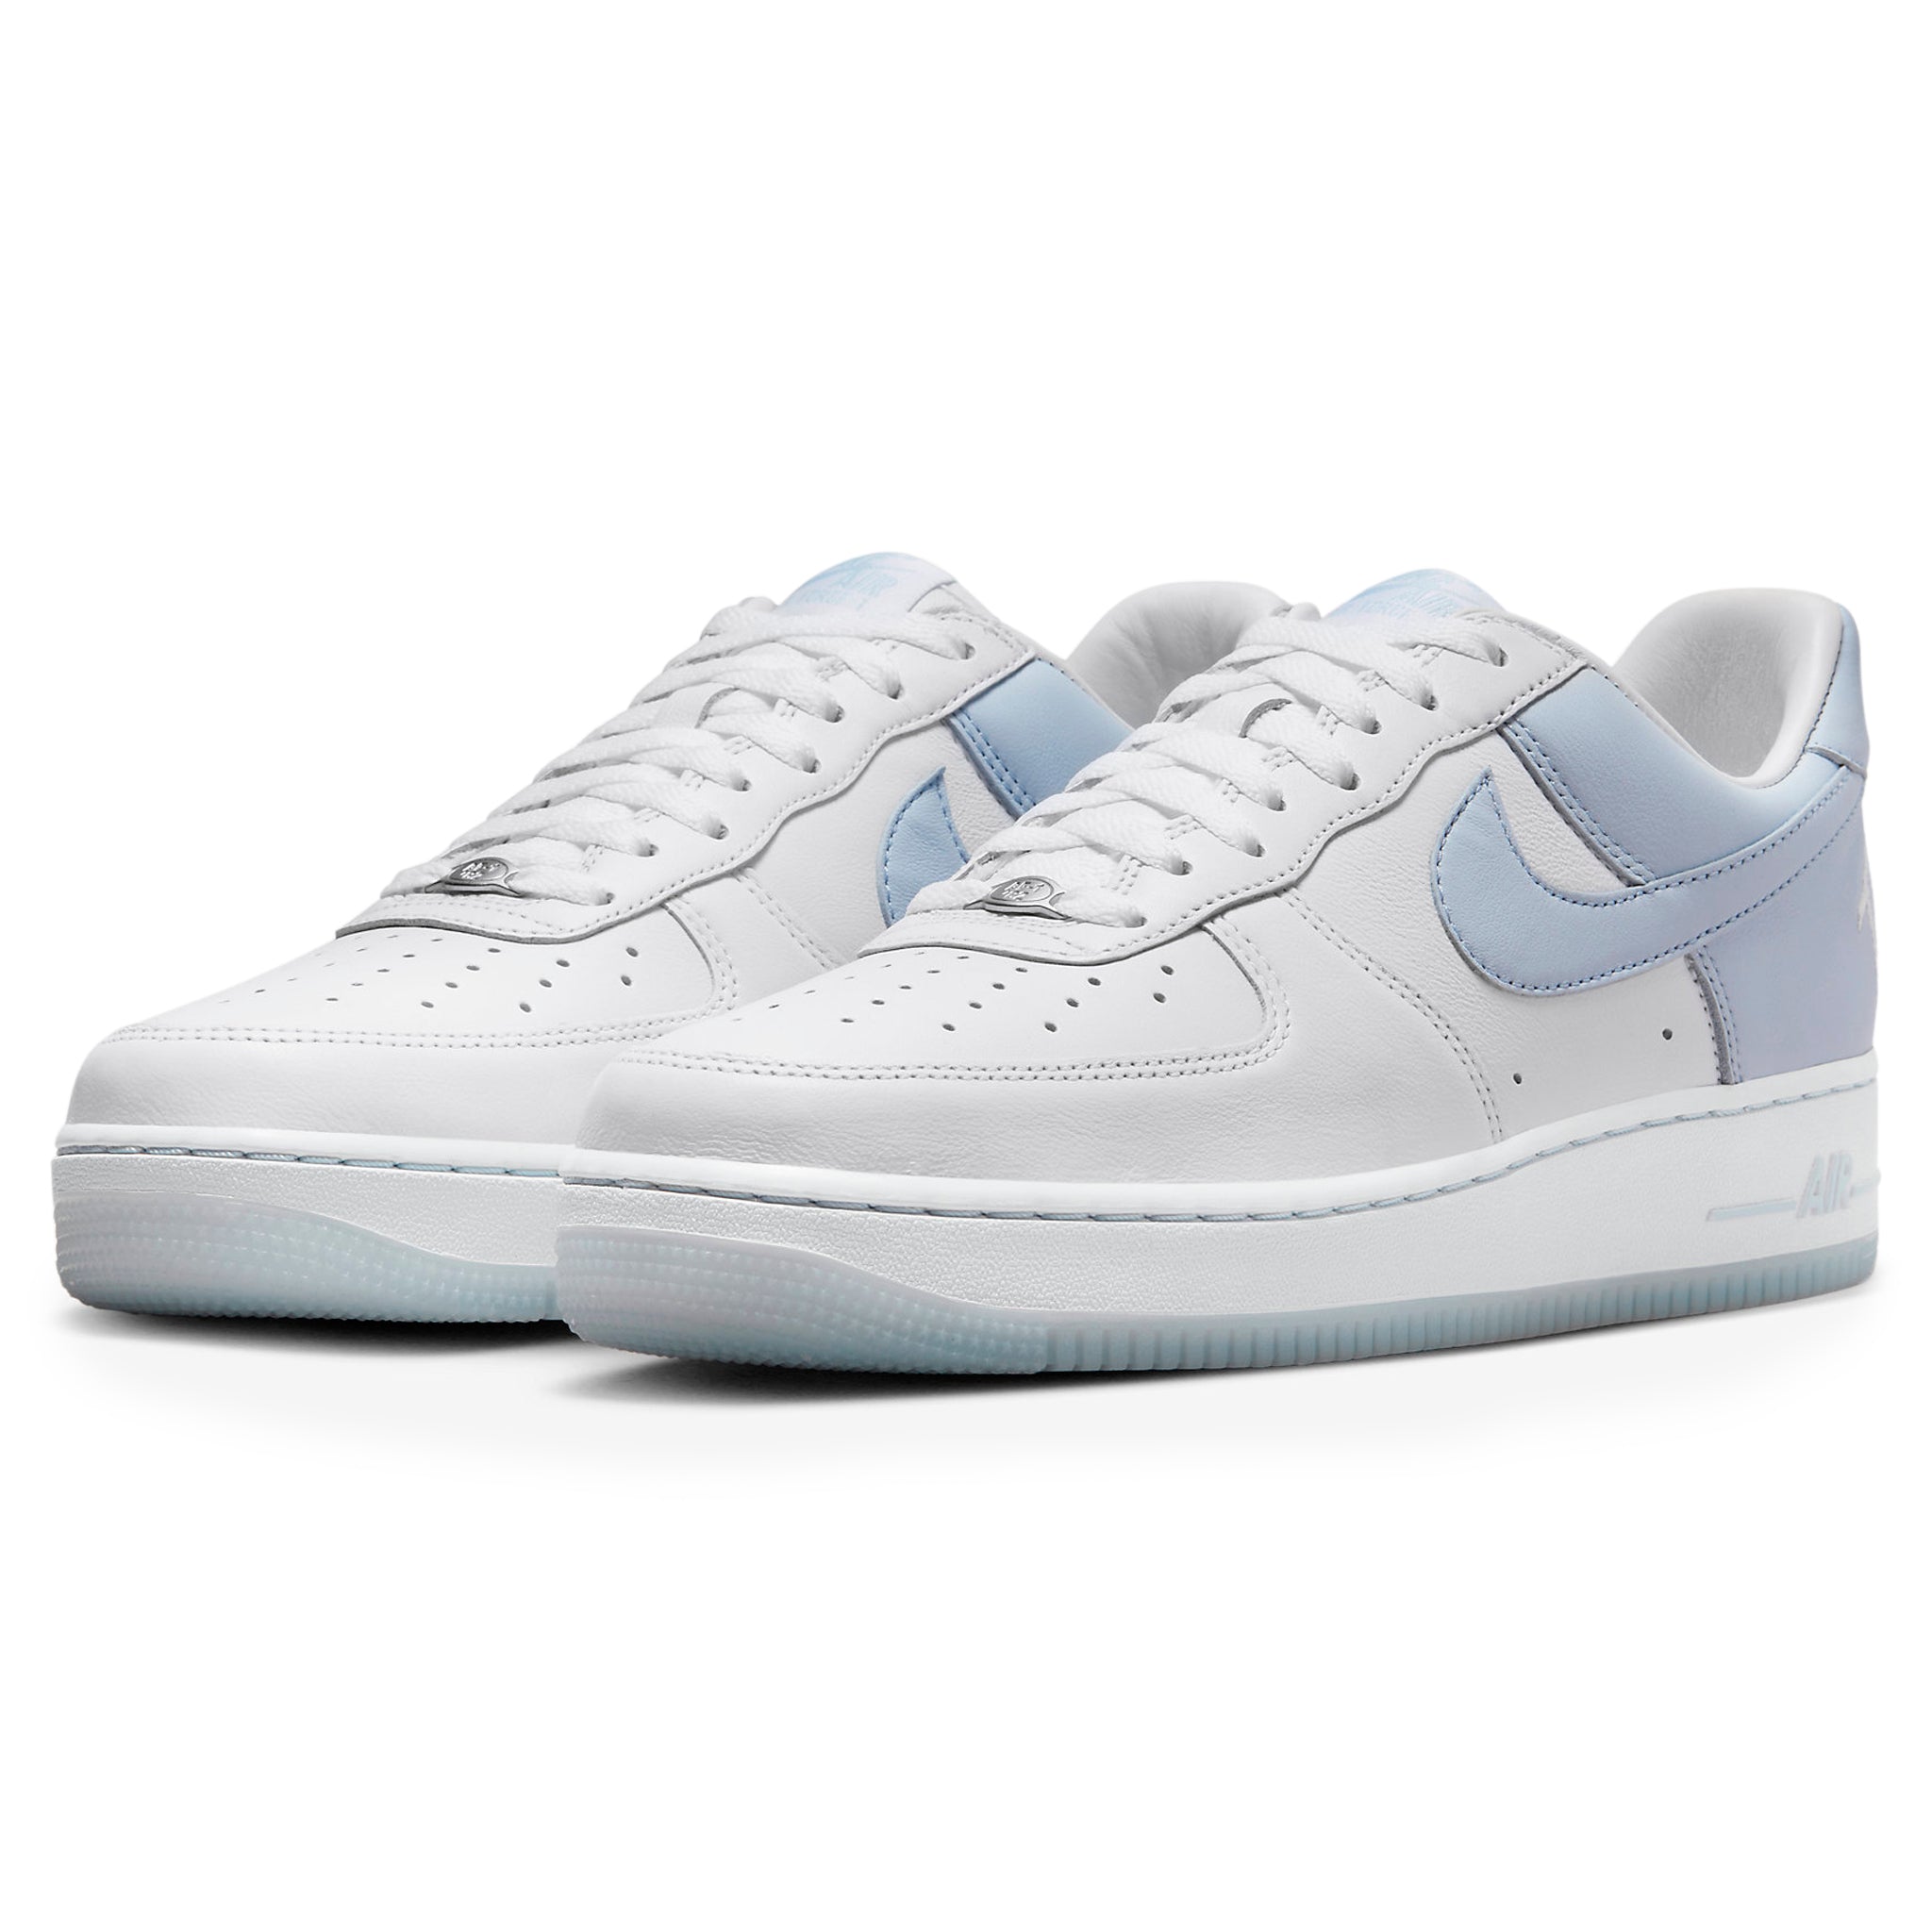 Front side view of Terror Squad x Nike Air Force 1 Low Loyalty FJ5755-100